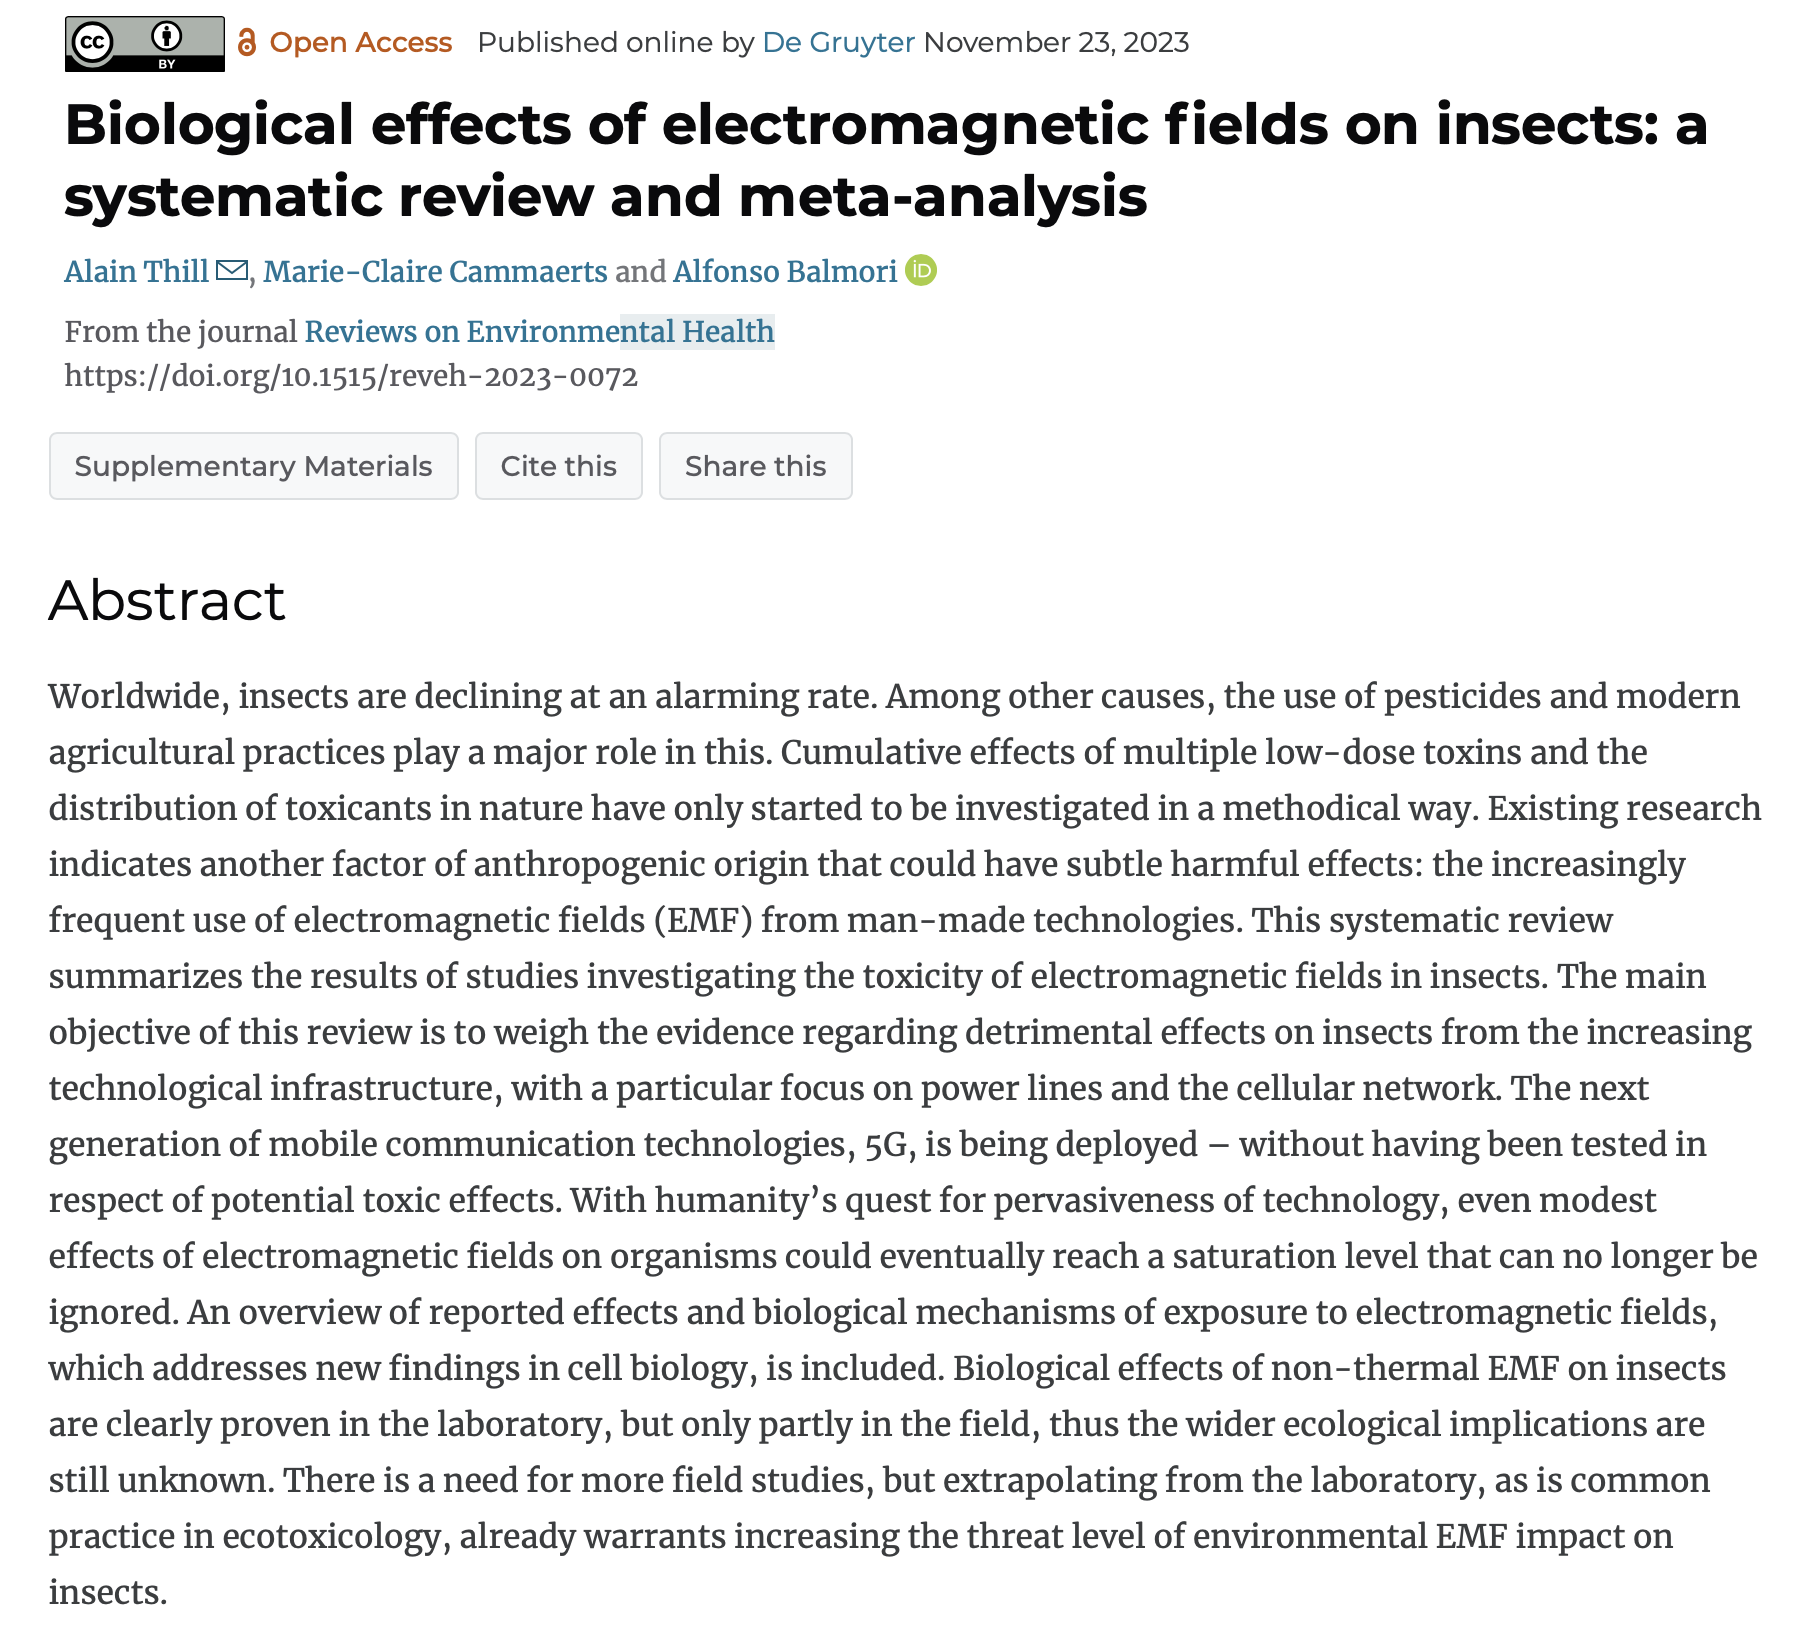 Biological Effects of EMFs on Insects